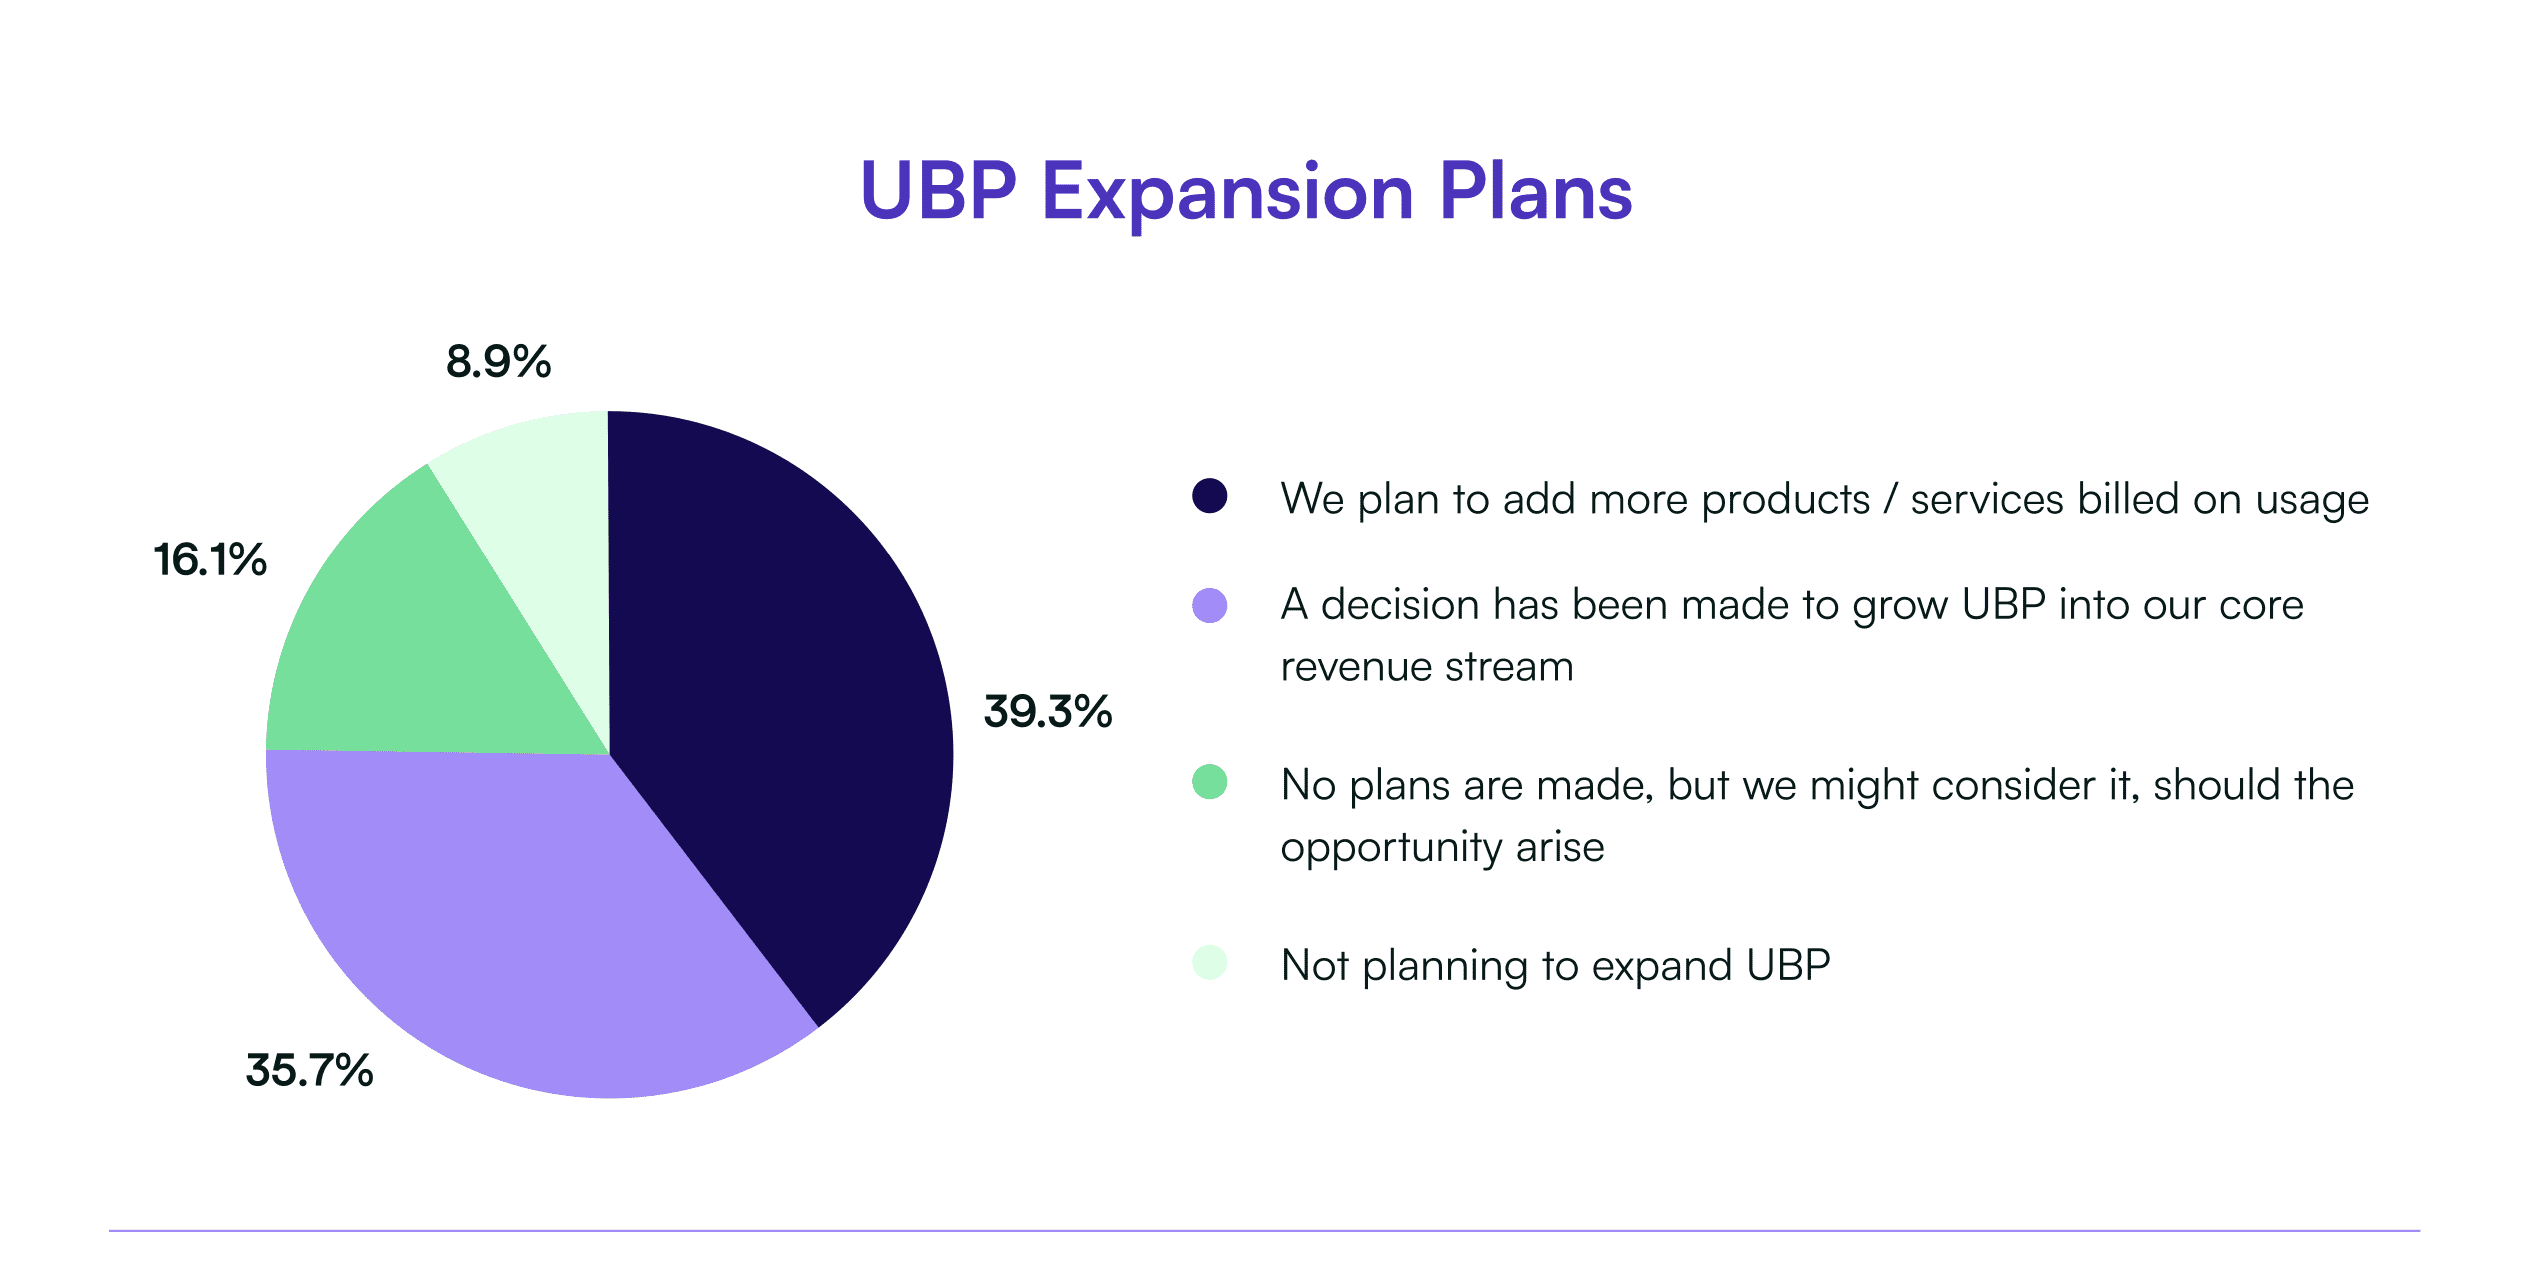 Usage-based pricing expansion plans in 2023